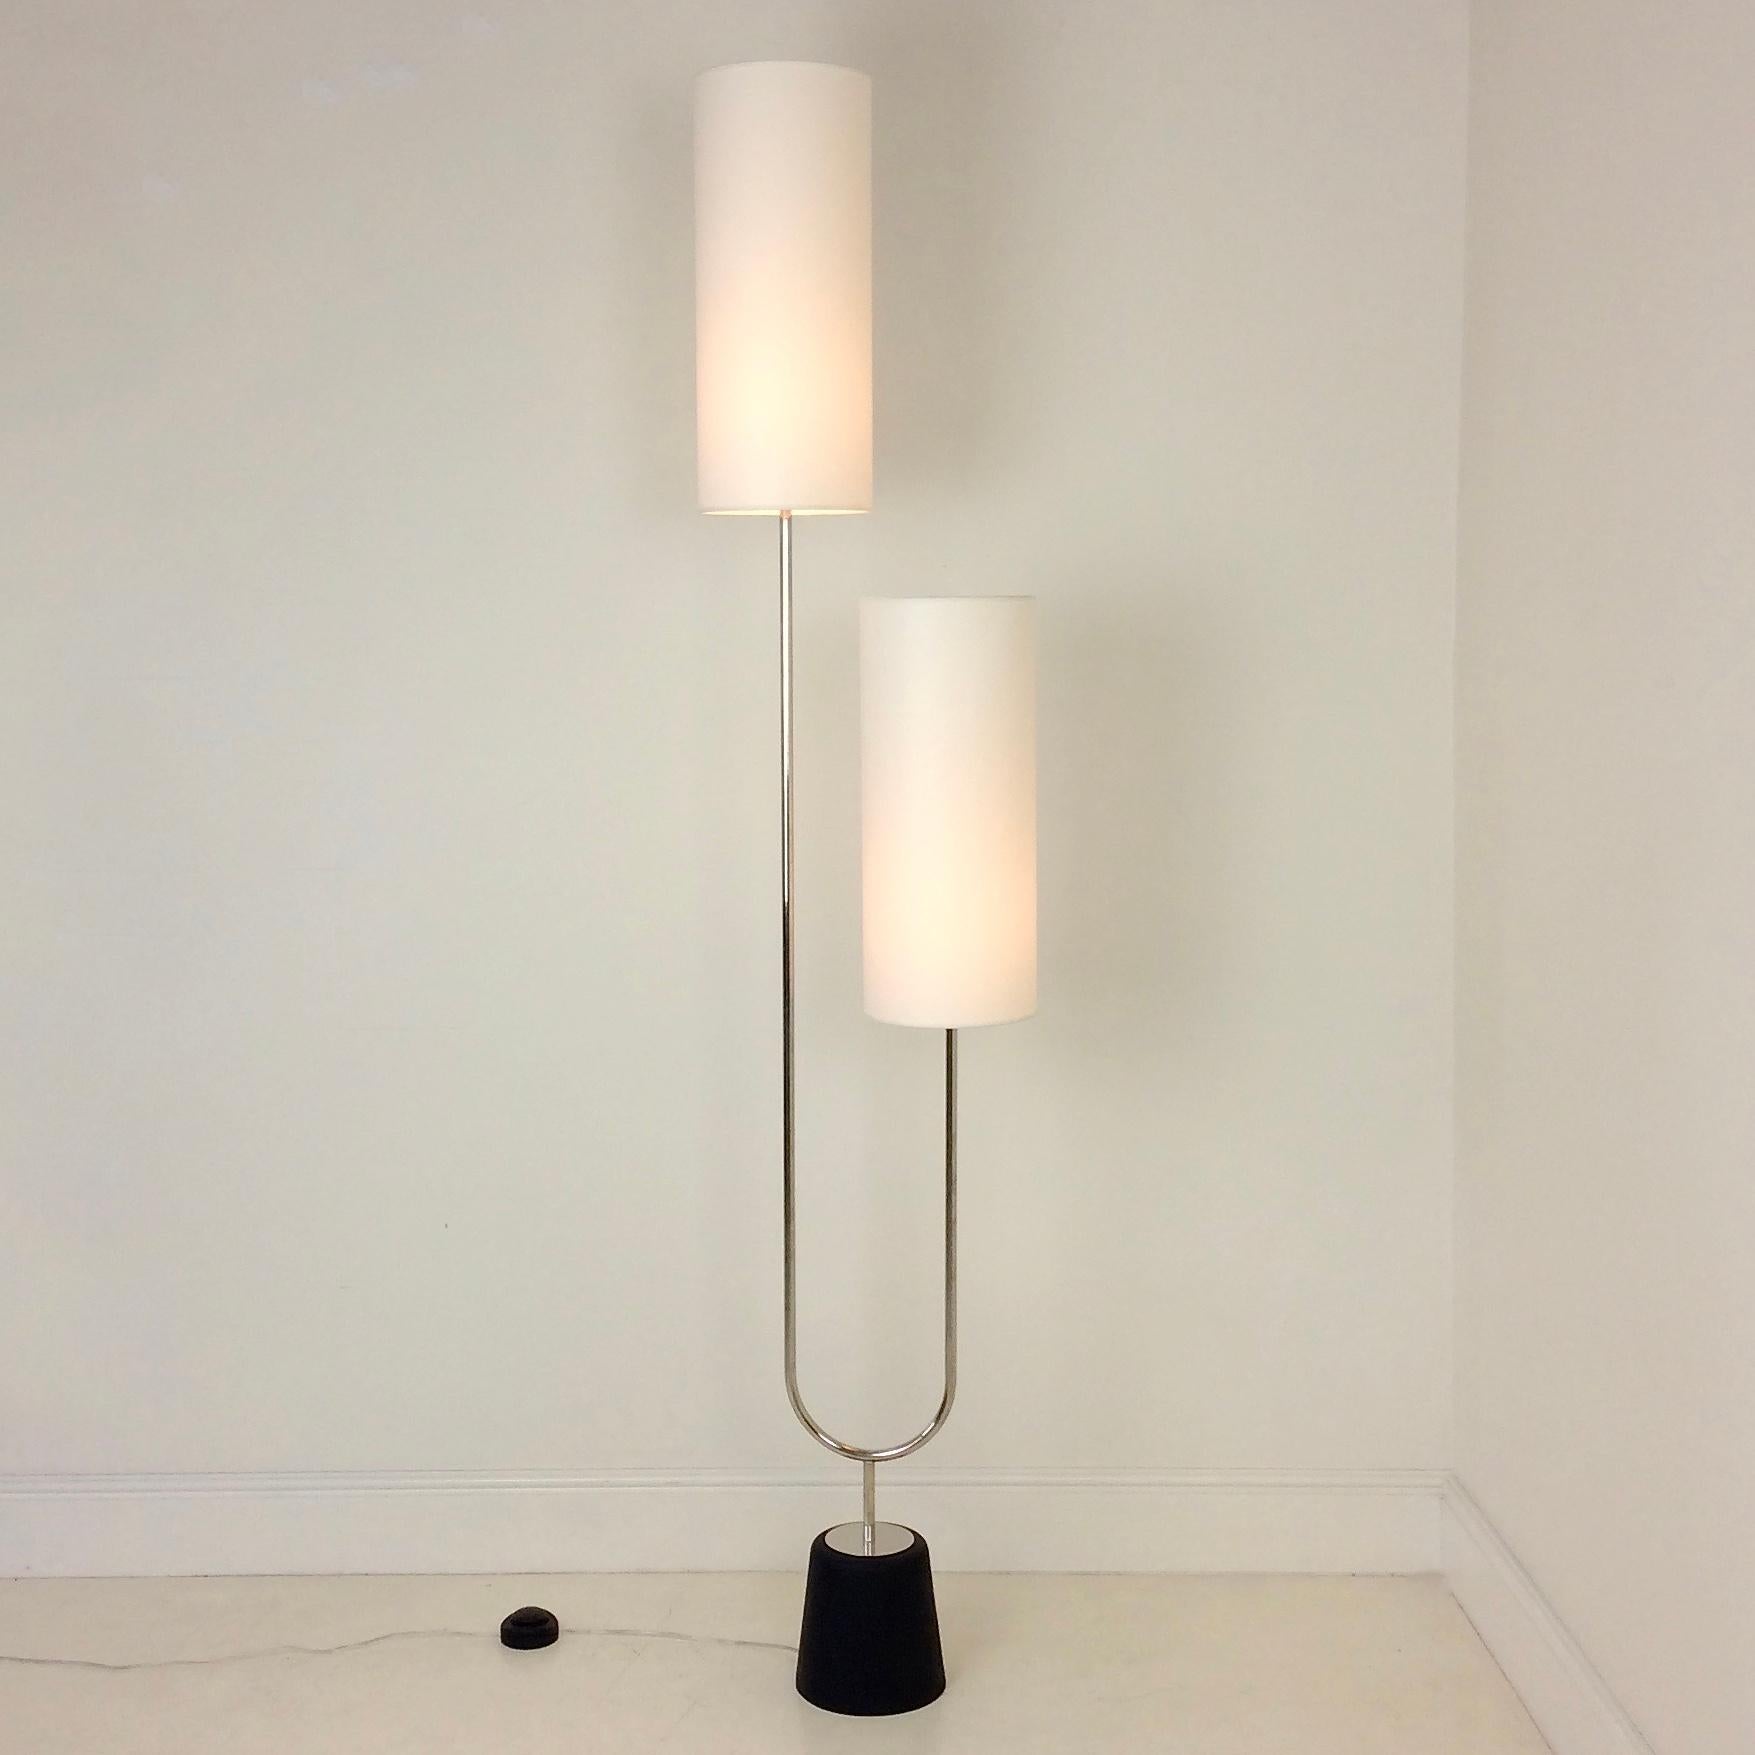 Arlus floor lamp, circa 1950, France.
Chromed and black metal, two new white fabric shades.
Rewired, two E27 bulbs of 40 W.
Dimensions: 168 cm H, 35 cm W, 19 cm D.
All purchases are covered by our Buyer Protection Guarantee.
This item can be